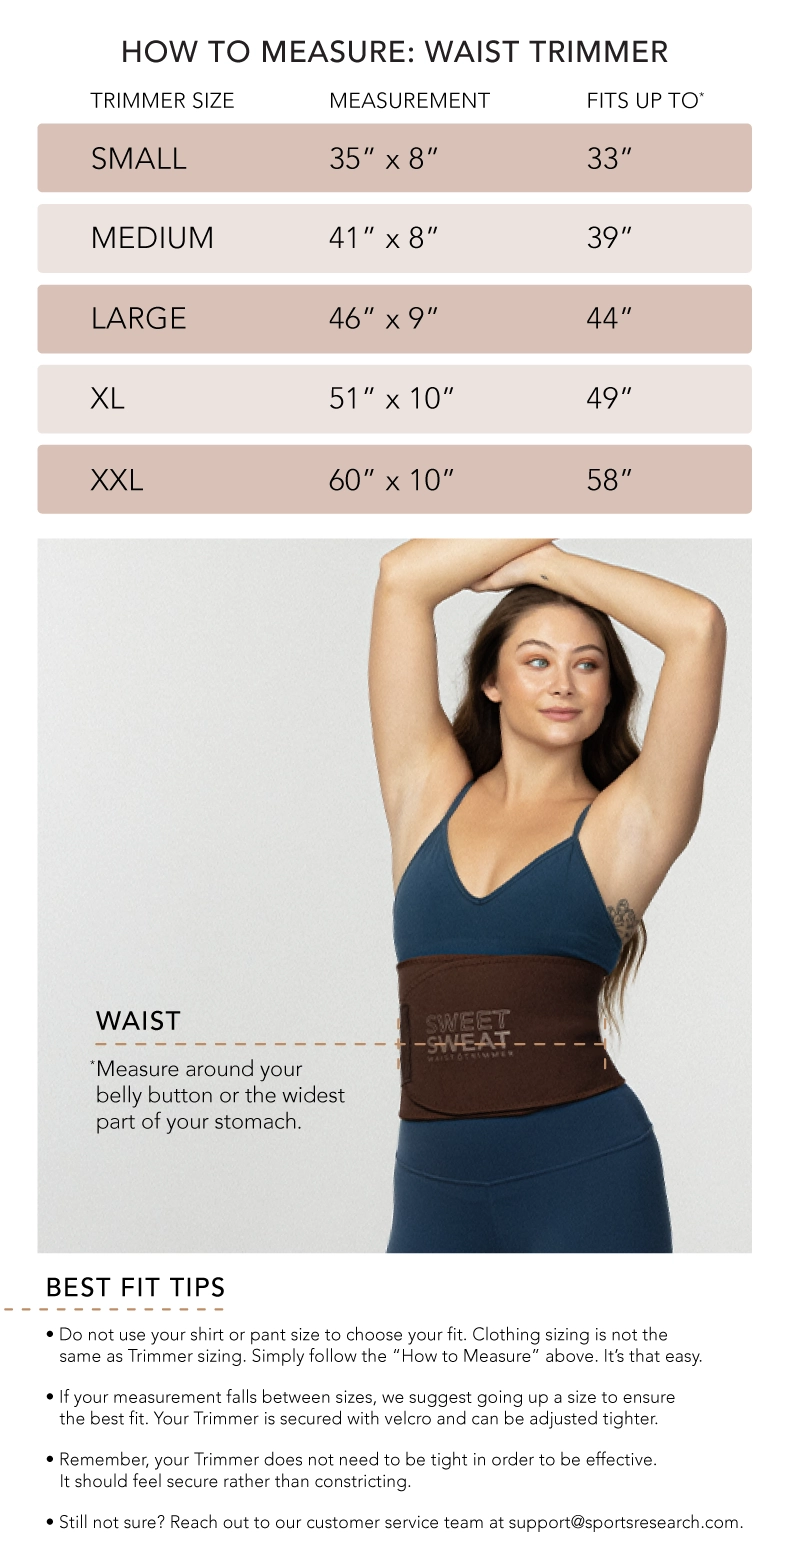 Search - Tag - Sweet Sweat Waist Trimmer